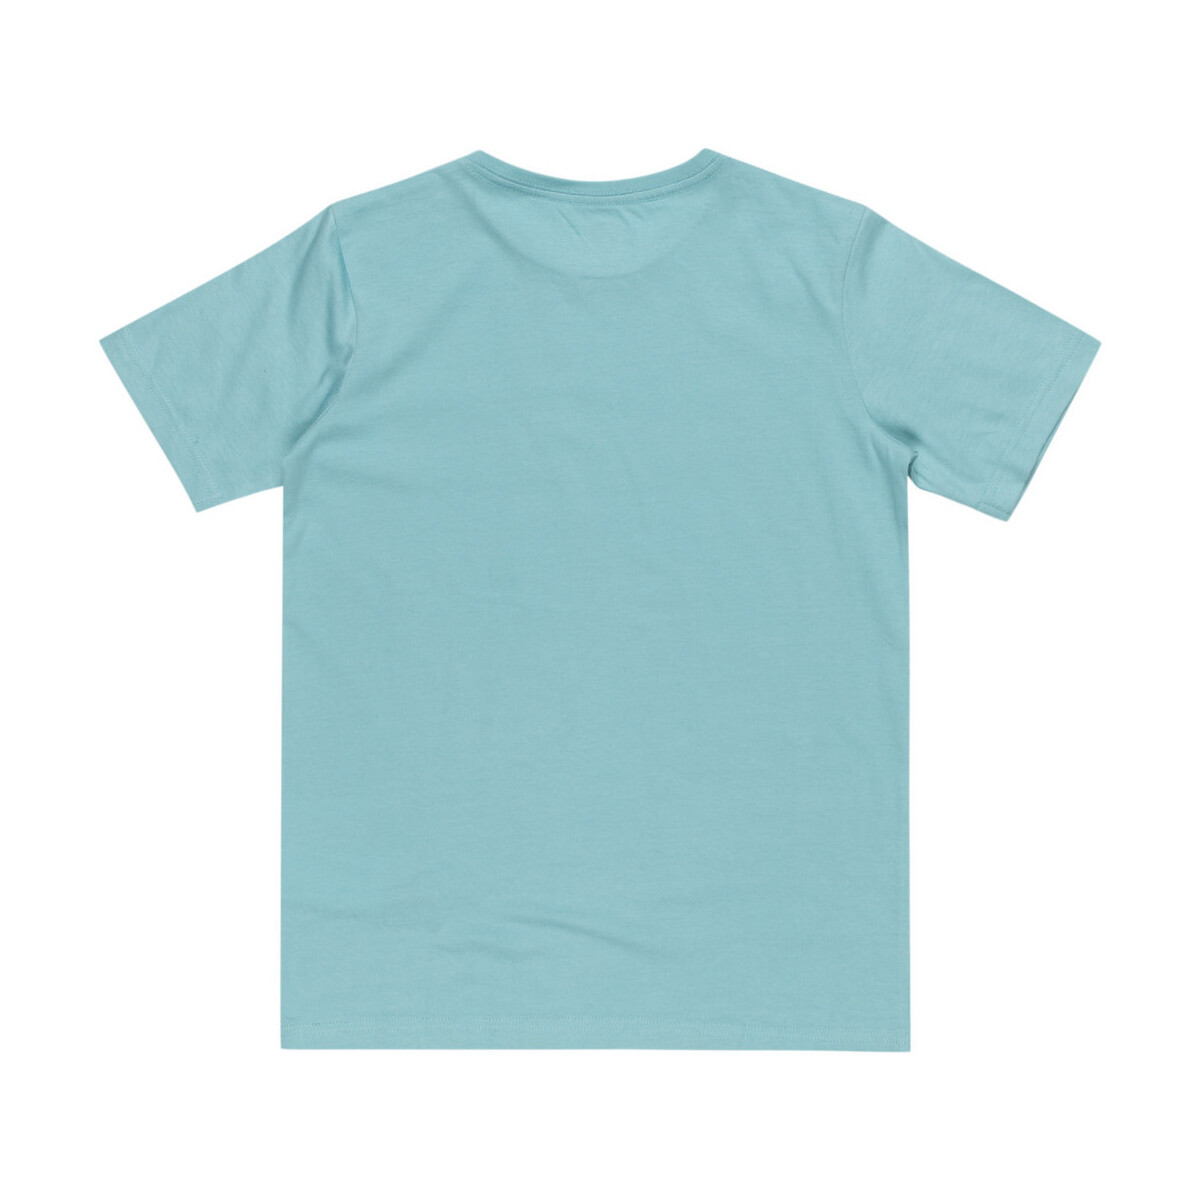 Quiksilver Bleu One Last Surf thq4YP0g